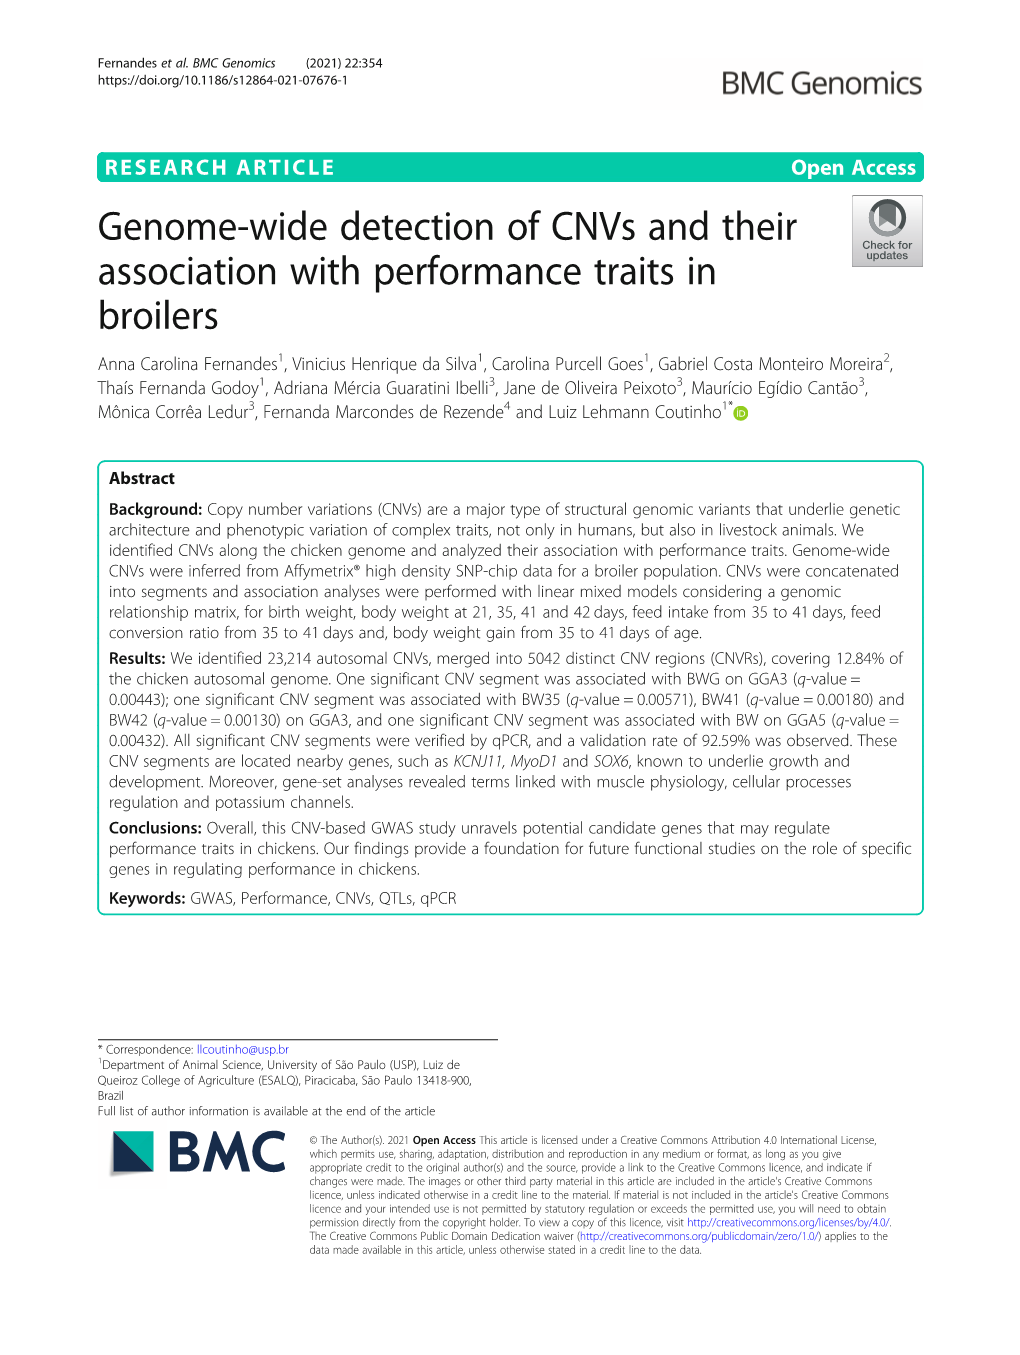 Genome-Wide Detection of Cnvs and Their Association with Performance